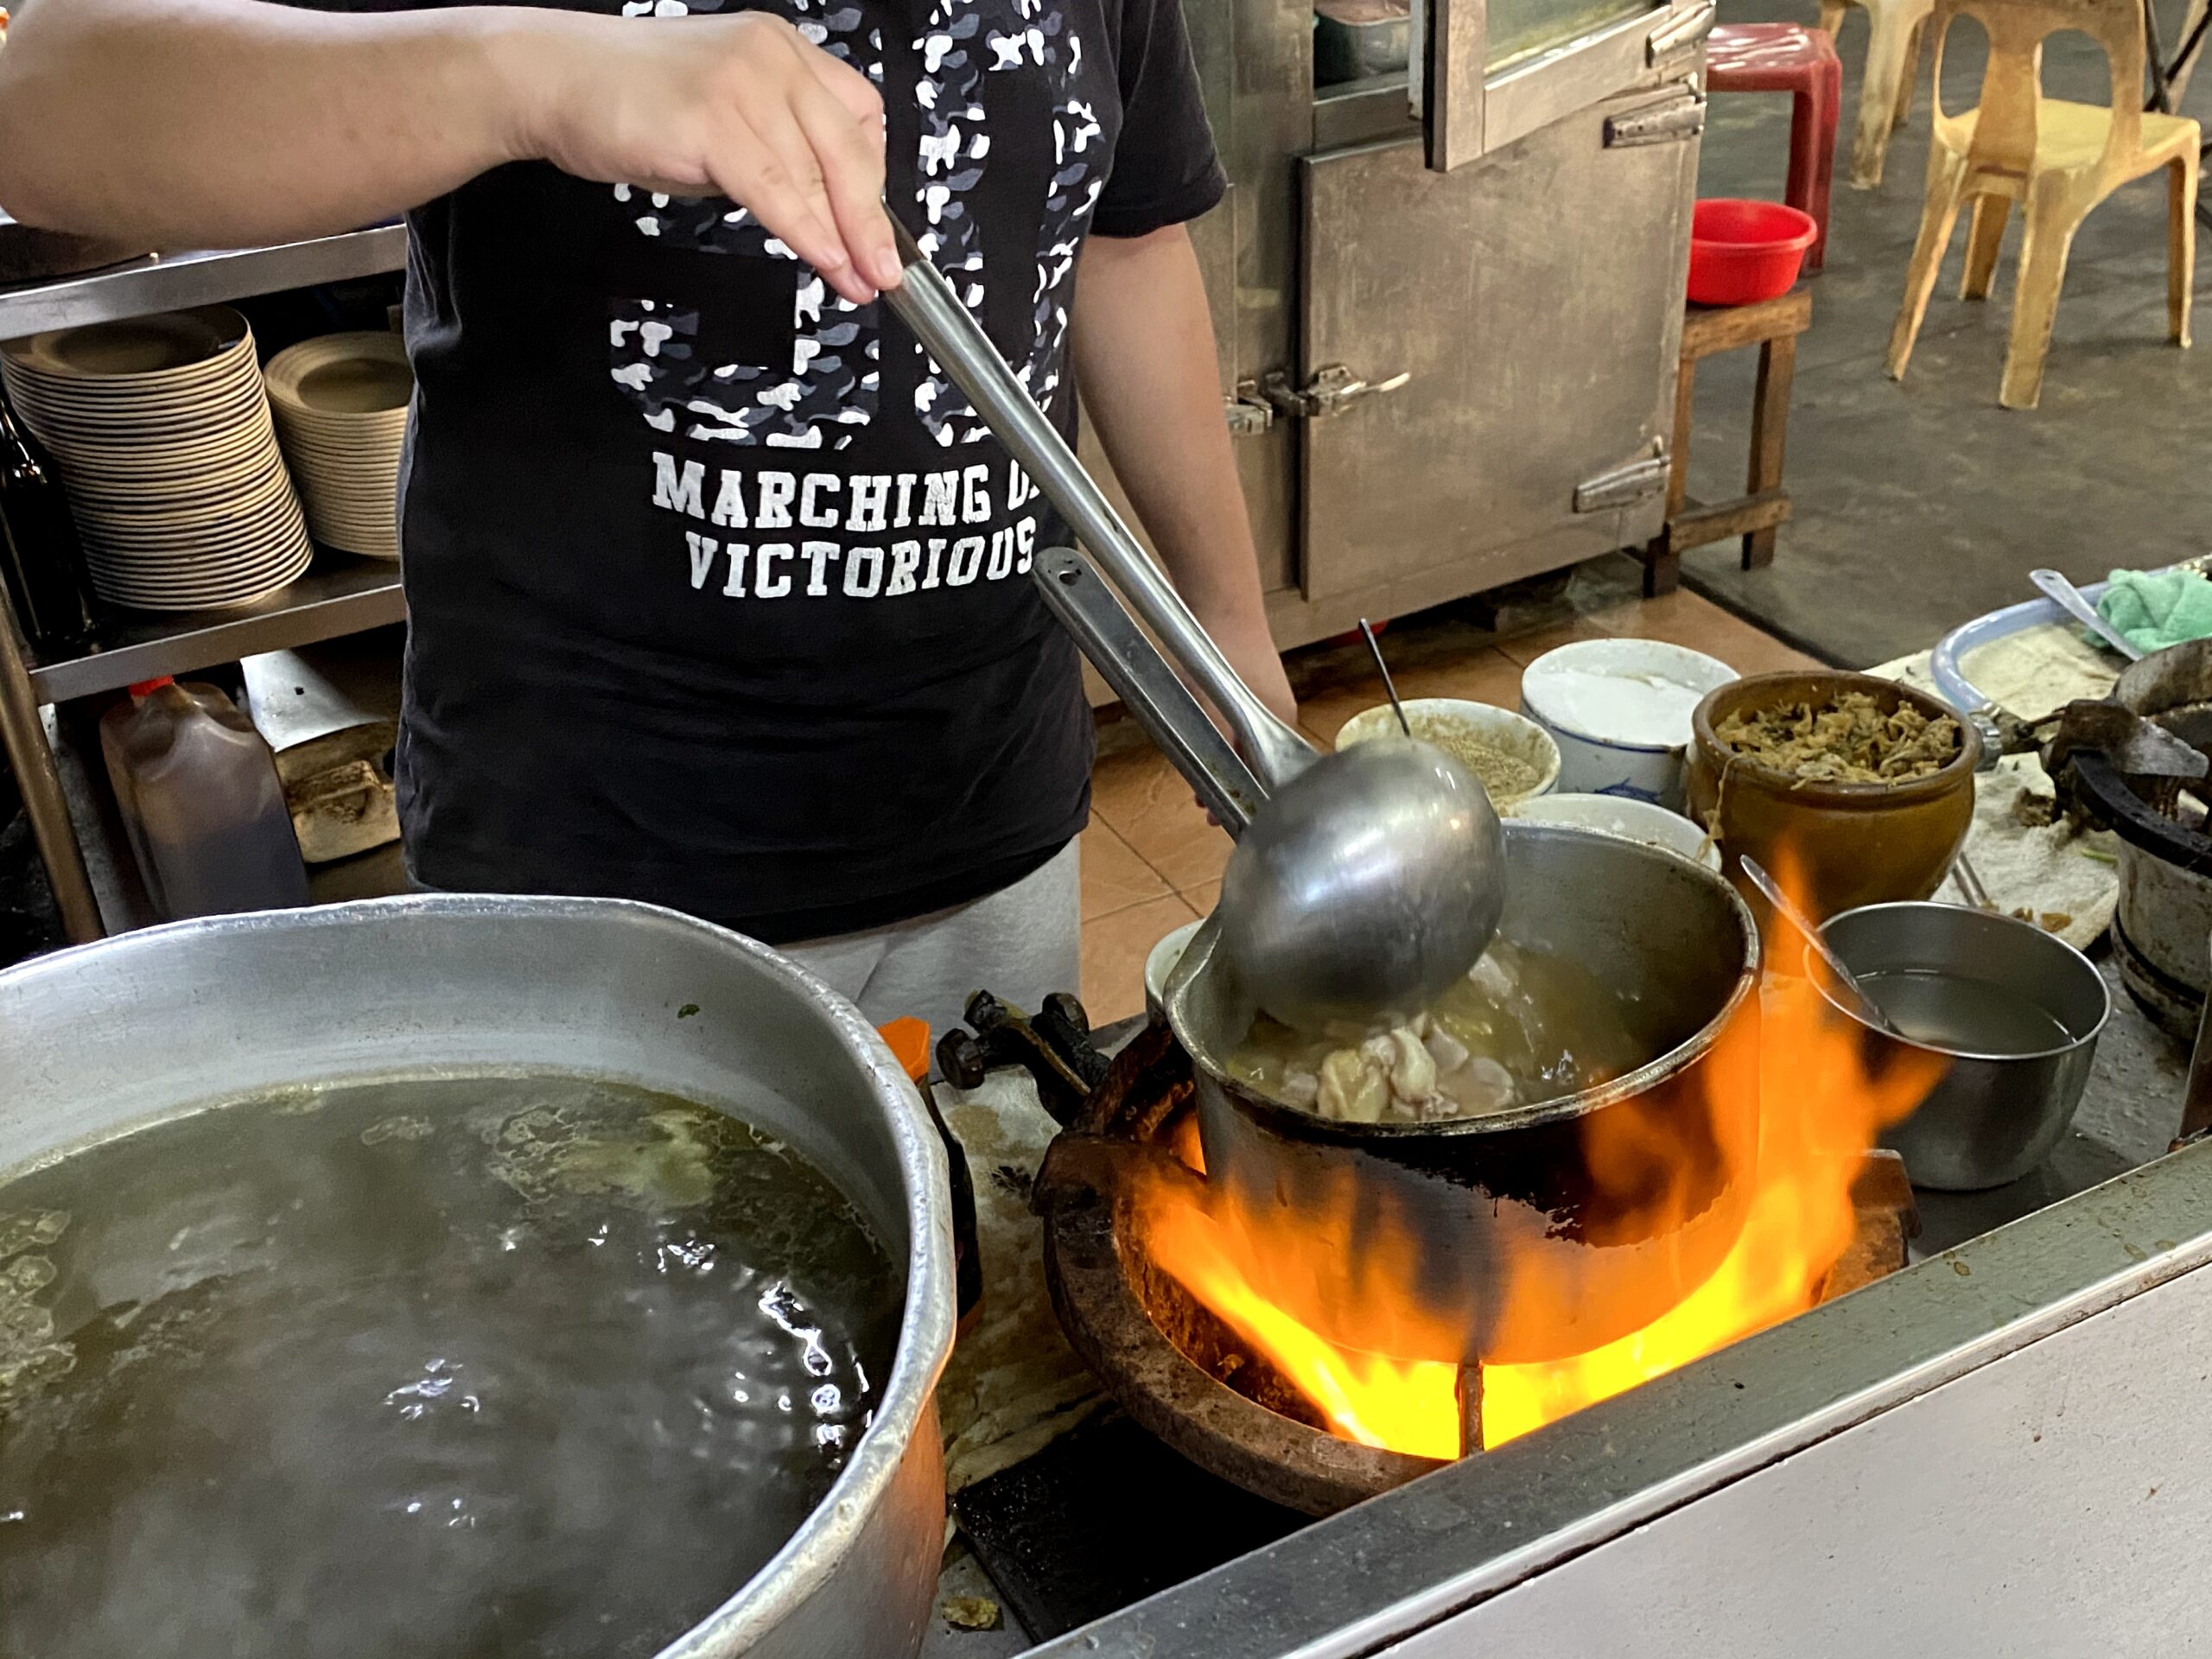 Of mosaics and soups: cooking up a storm in serdang